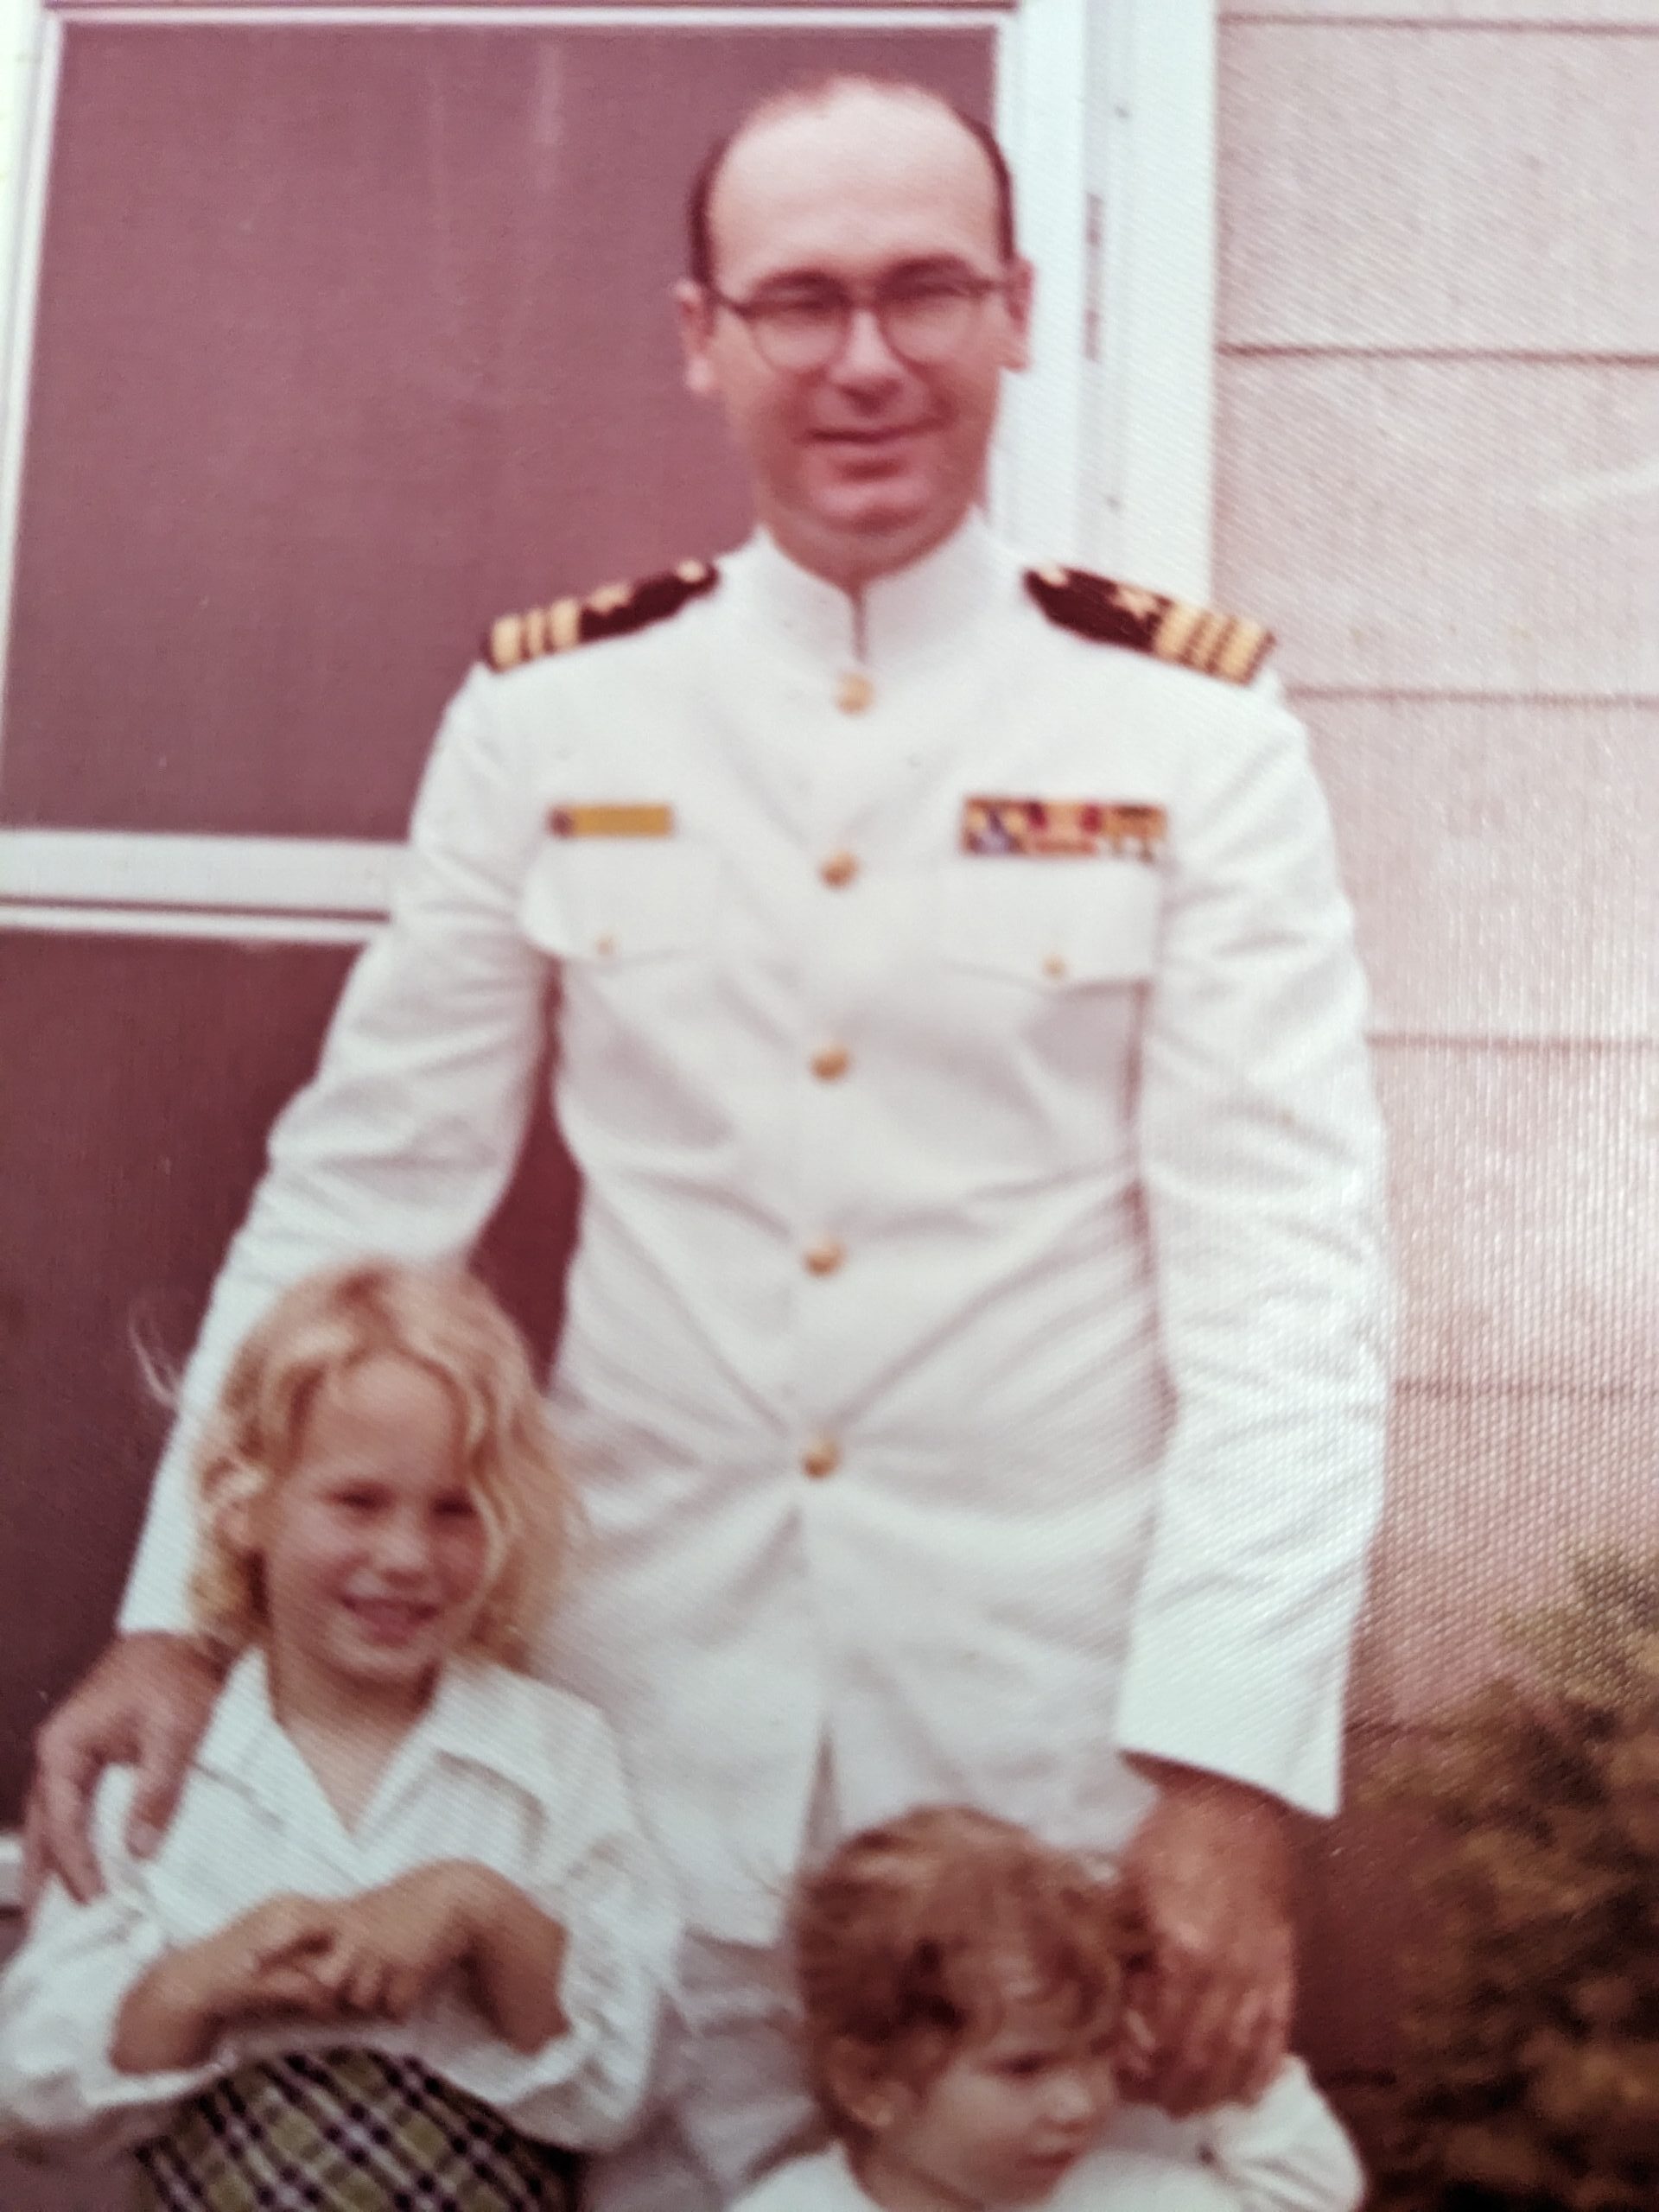 A Navy officer with two children